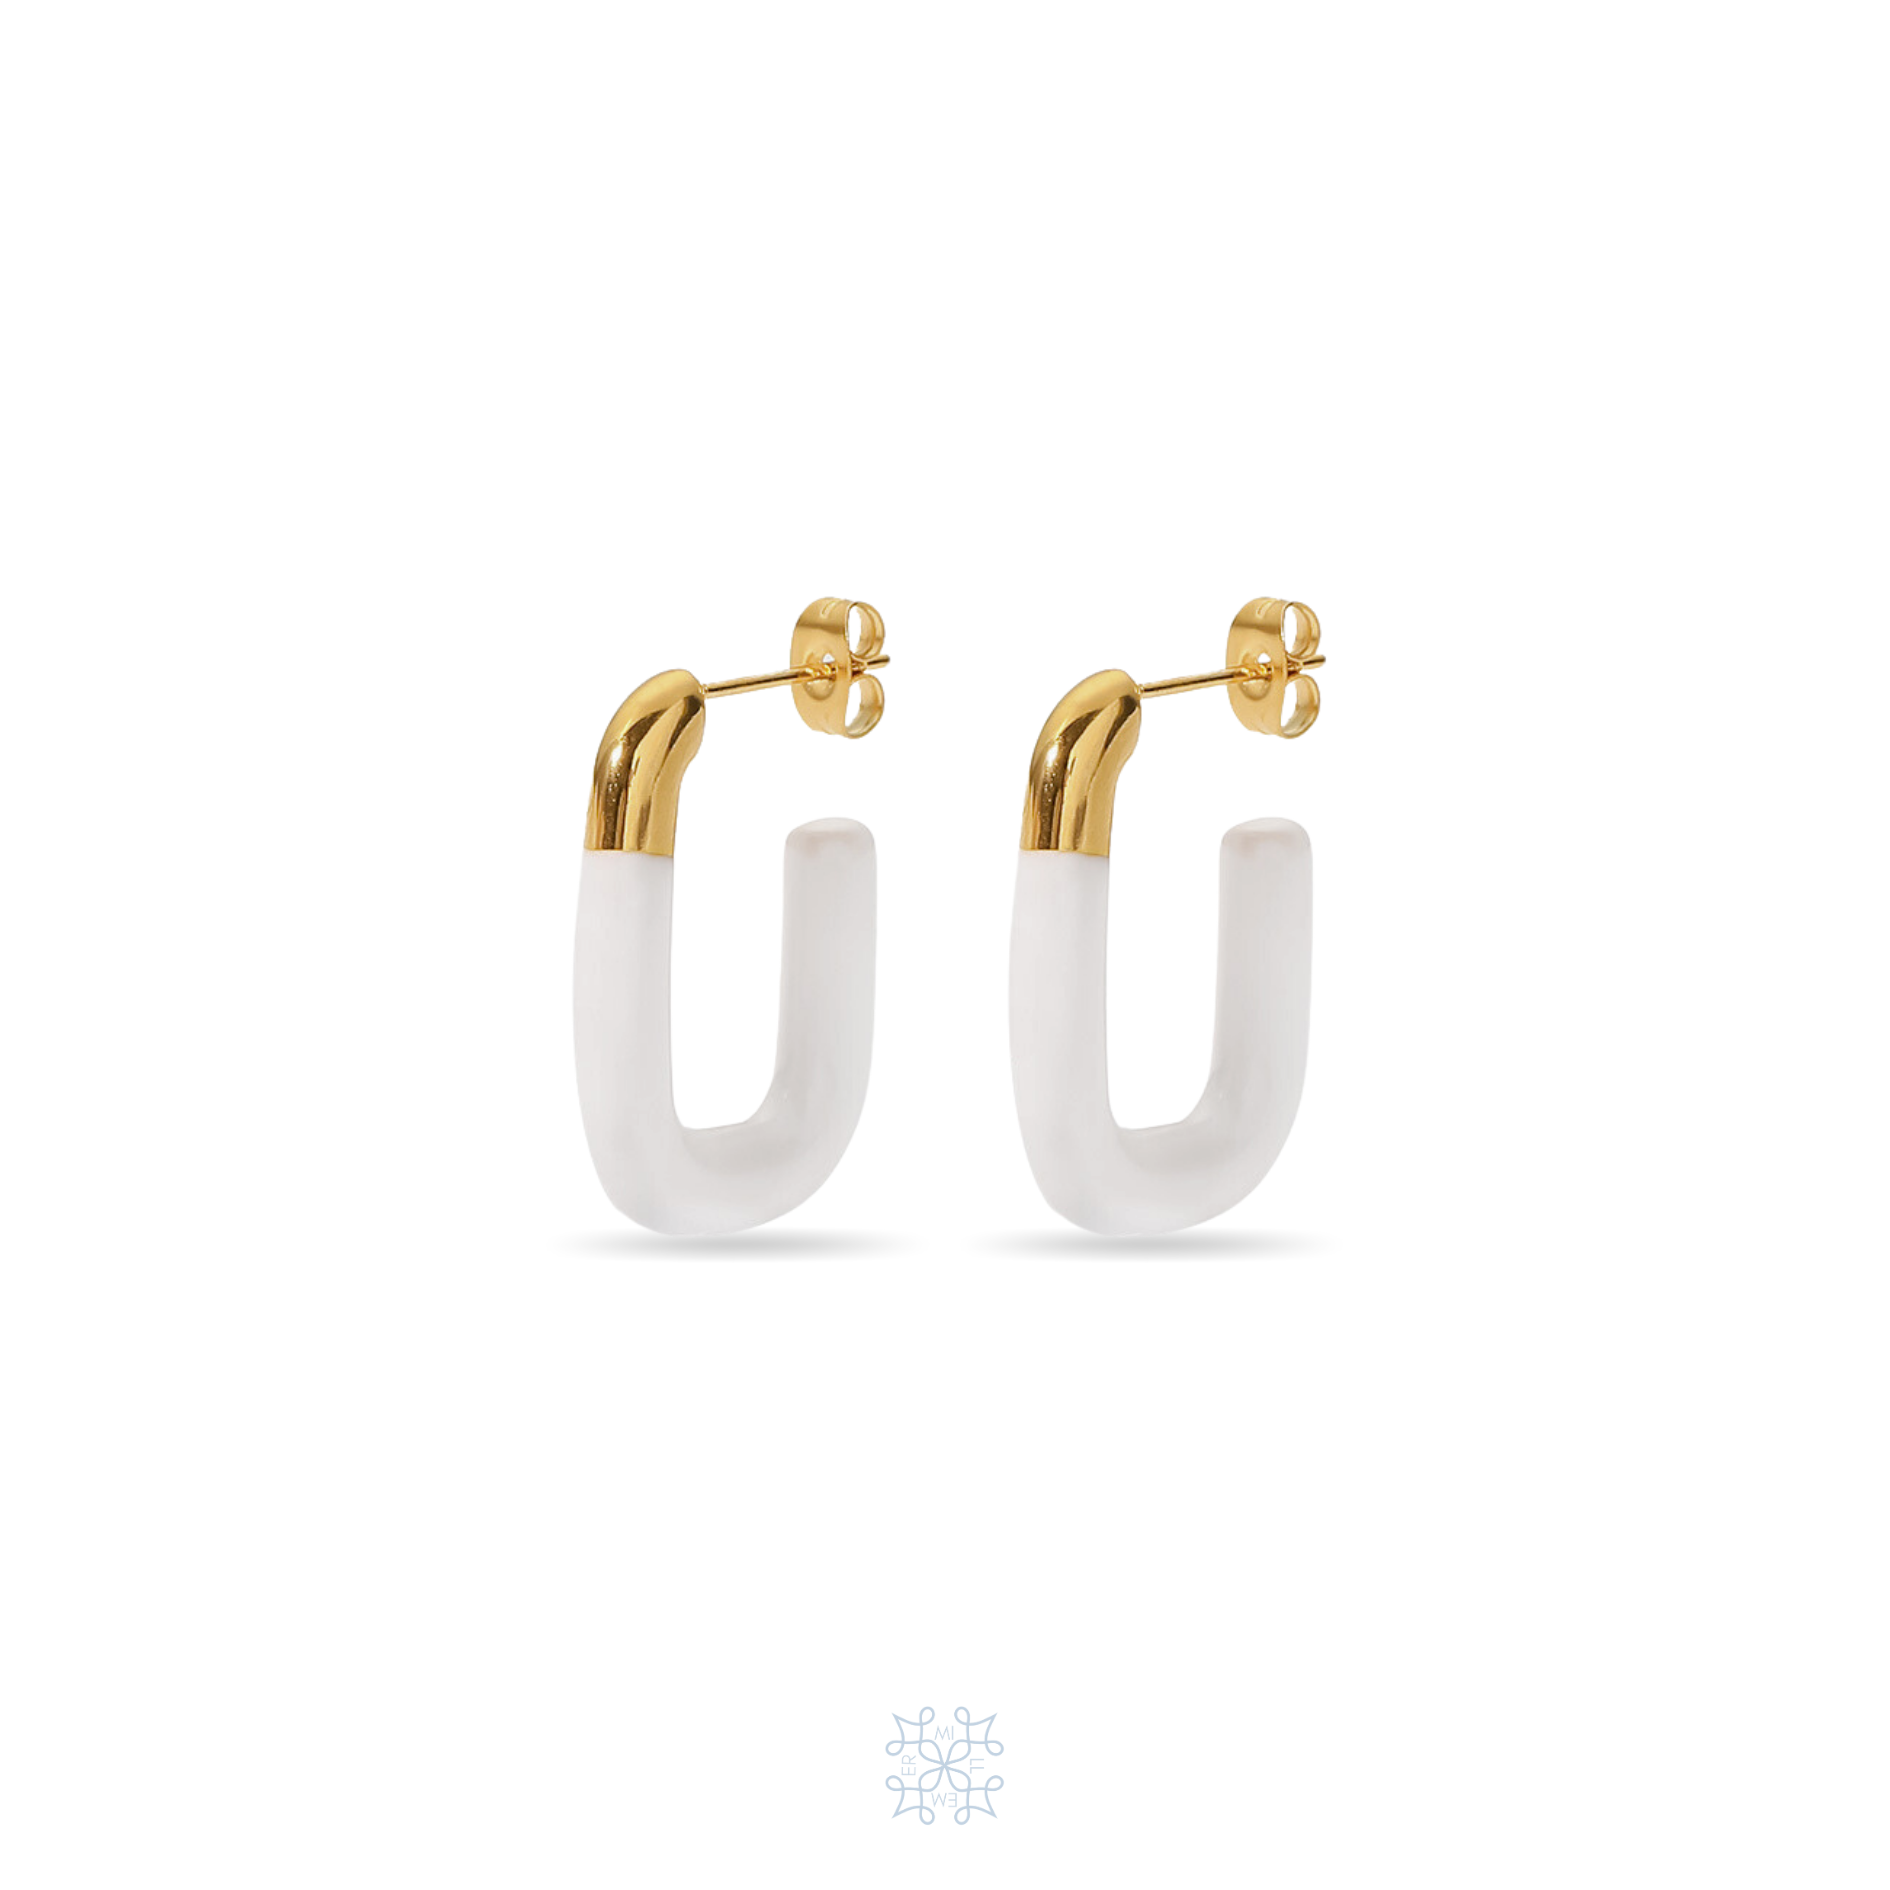 Gold Hoop Earrings Shaped in the form of letter U, more than half painted in white Enamel.